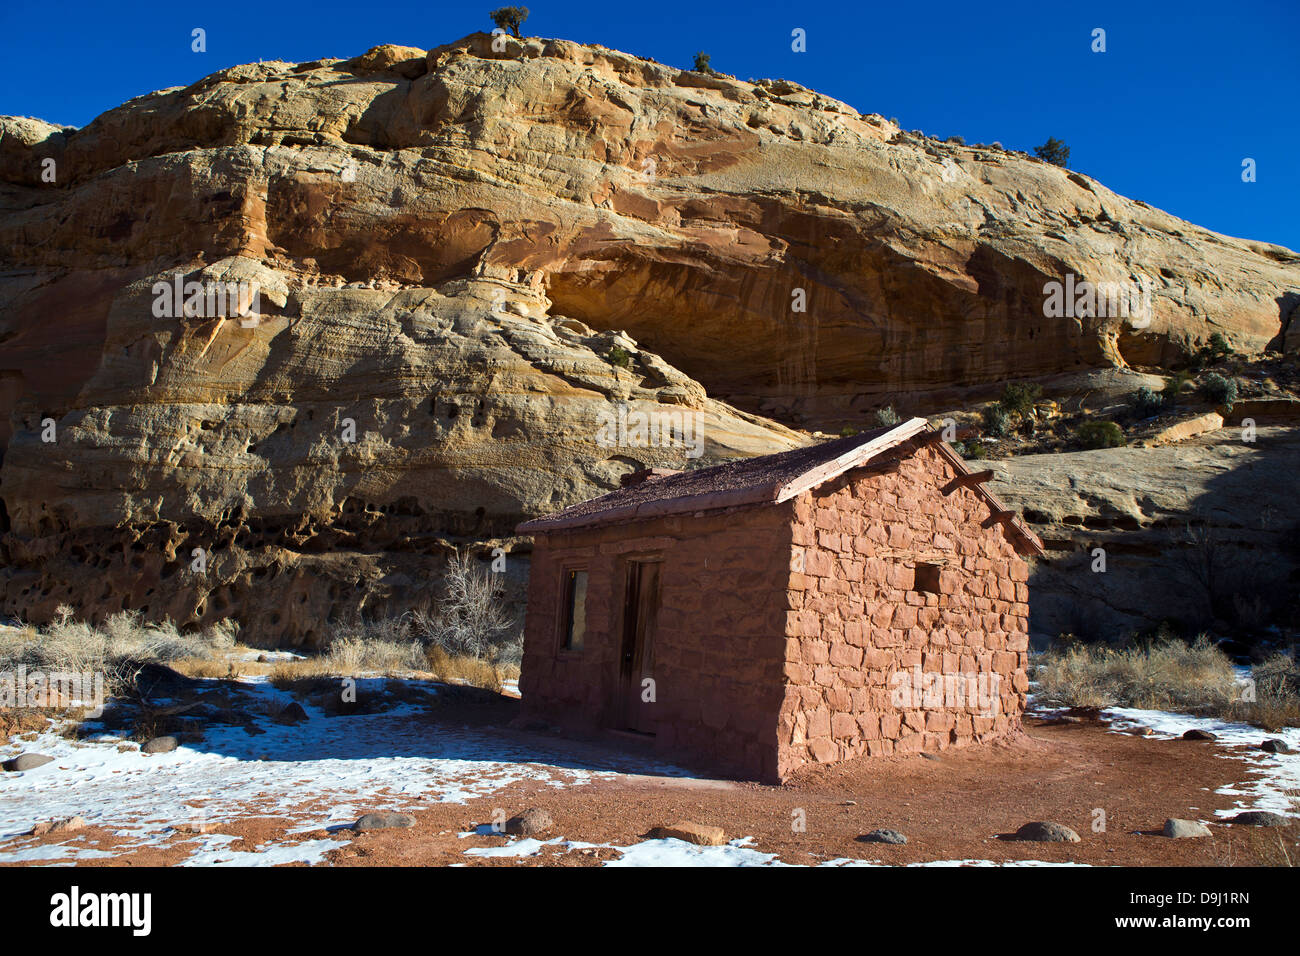 Elijah Cutler Behunin Cabin, a single story home constructed of sandstone and plaster-cement wash, Capitol Reef National Park, Utah, United States of America Stock Photo